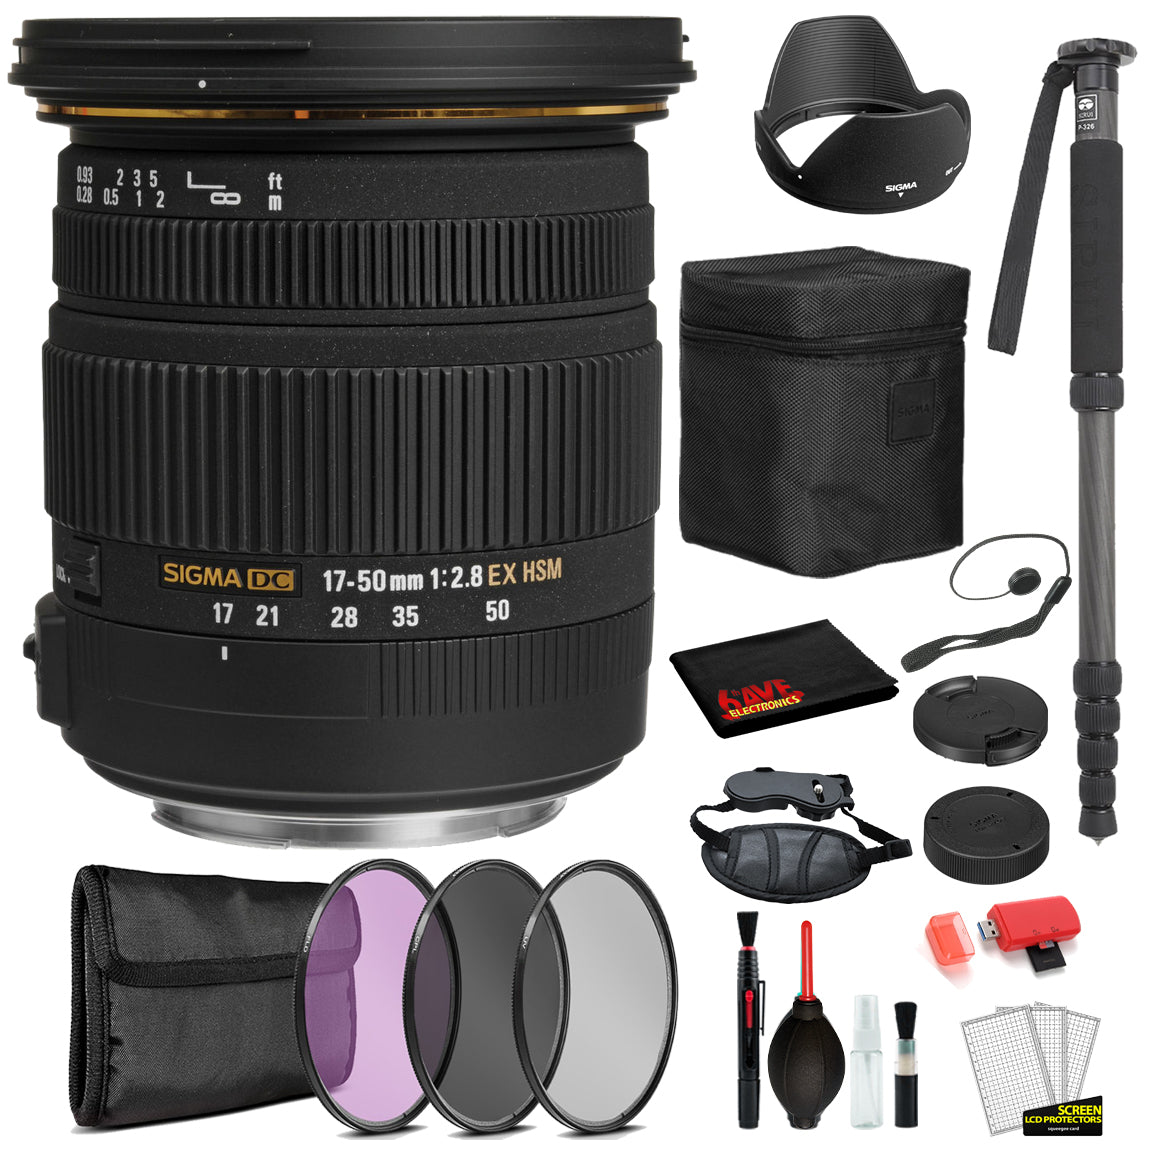 Sigma 17-50mm f/2.8 EX DC OS HSM Lens for Nikon F with Bundle Includes: Pro Series Monopod, 3PC Filter Kit + More